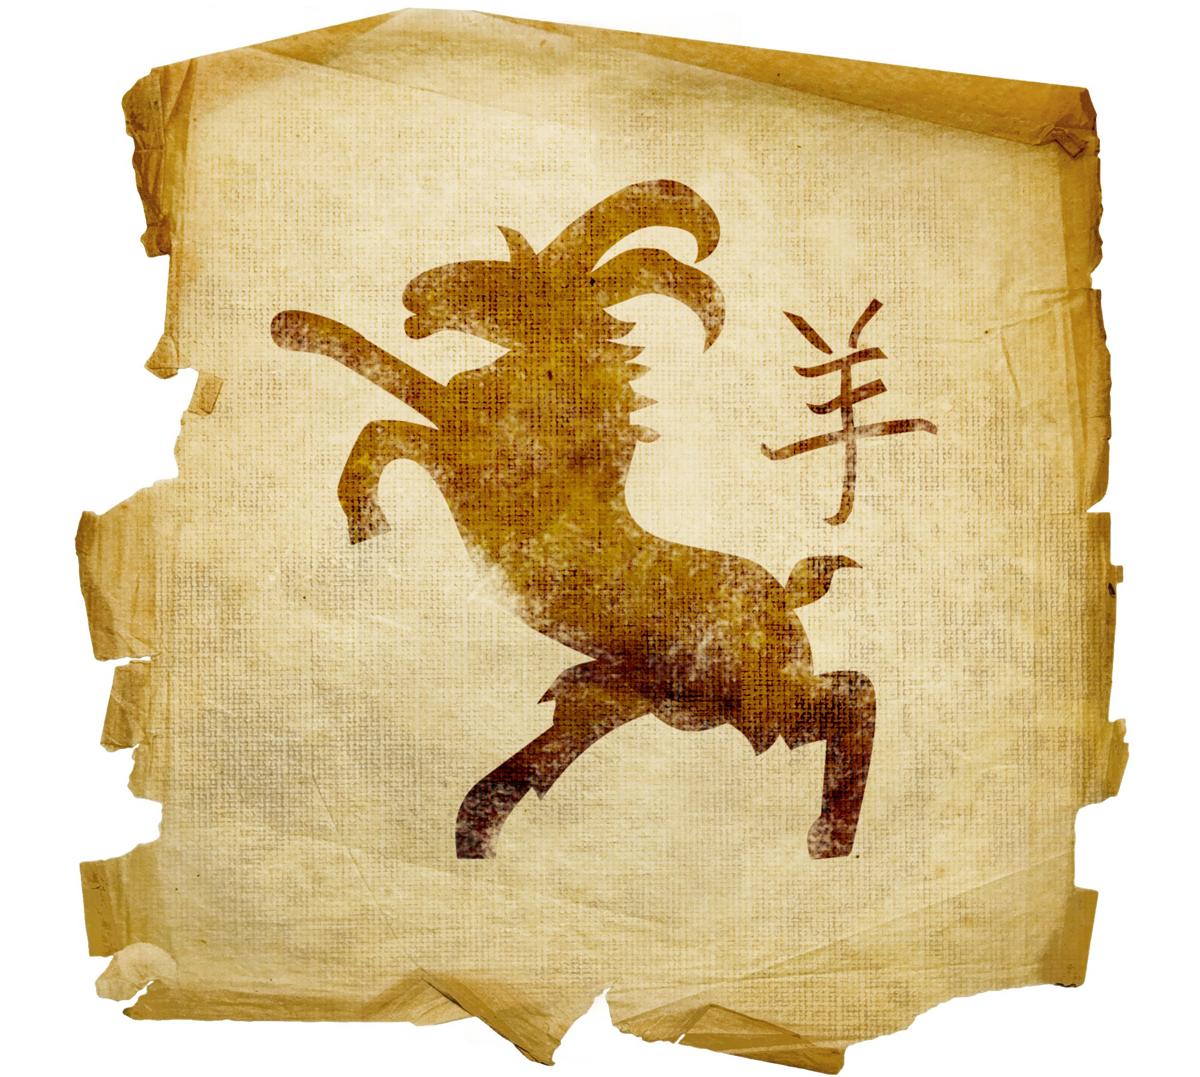 Detailed Information About the Chinese Zodiac Symbols and Meanings1200 x 1077